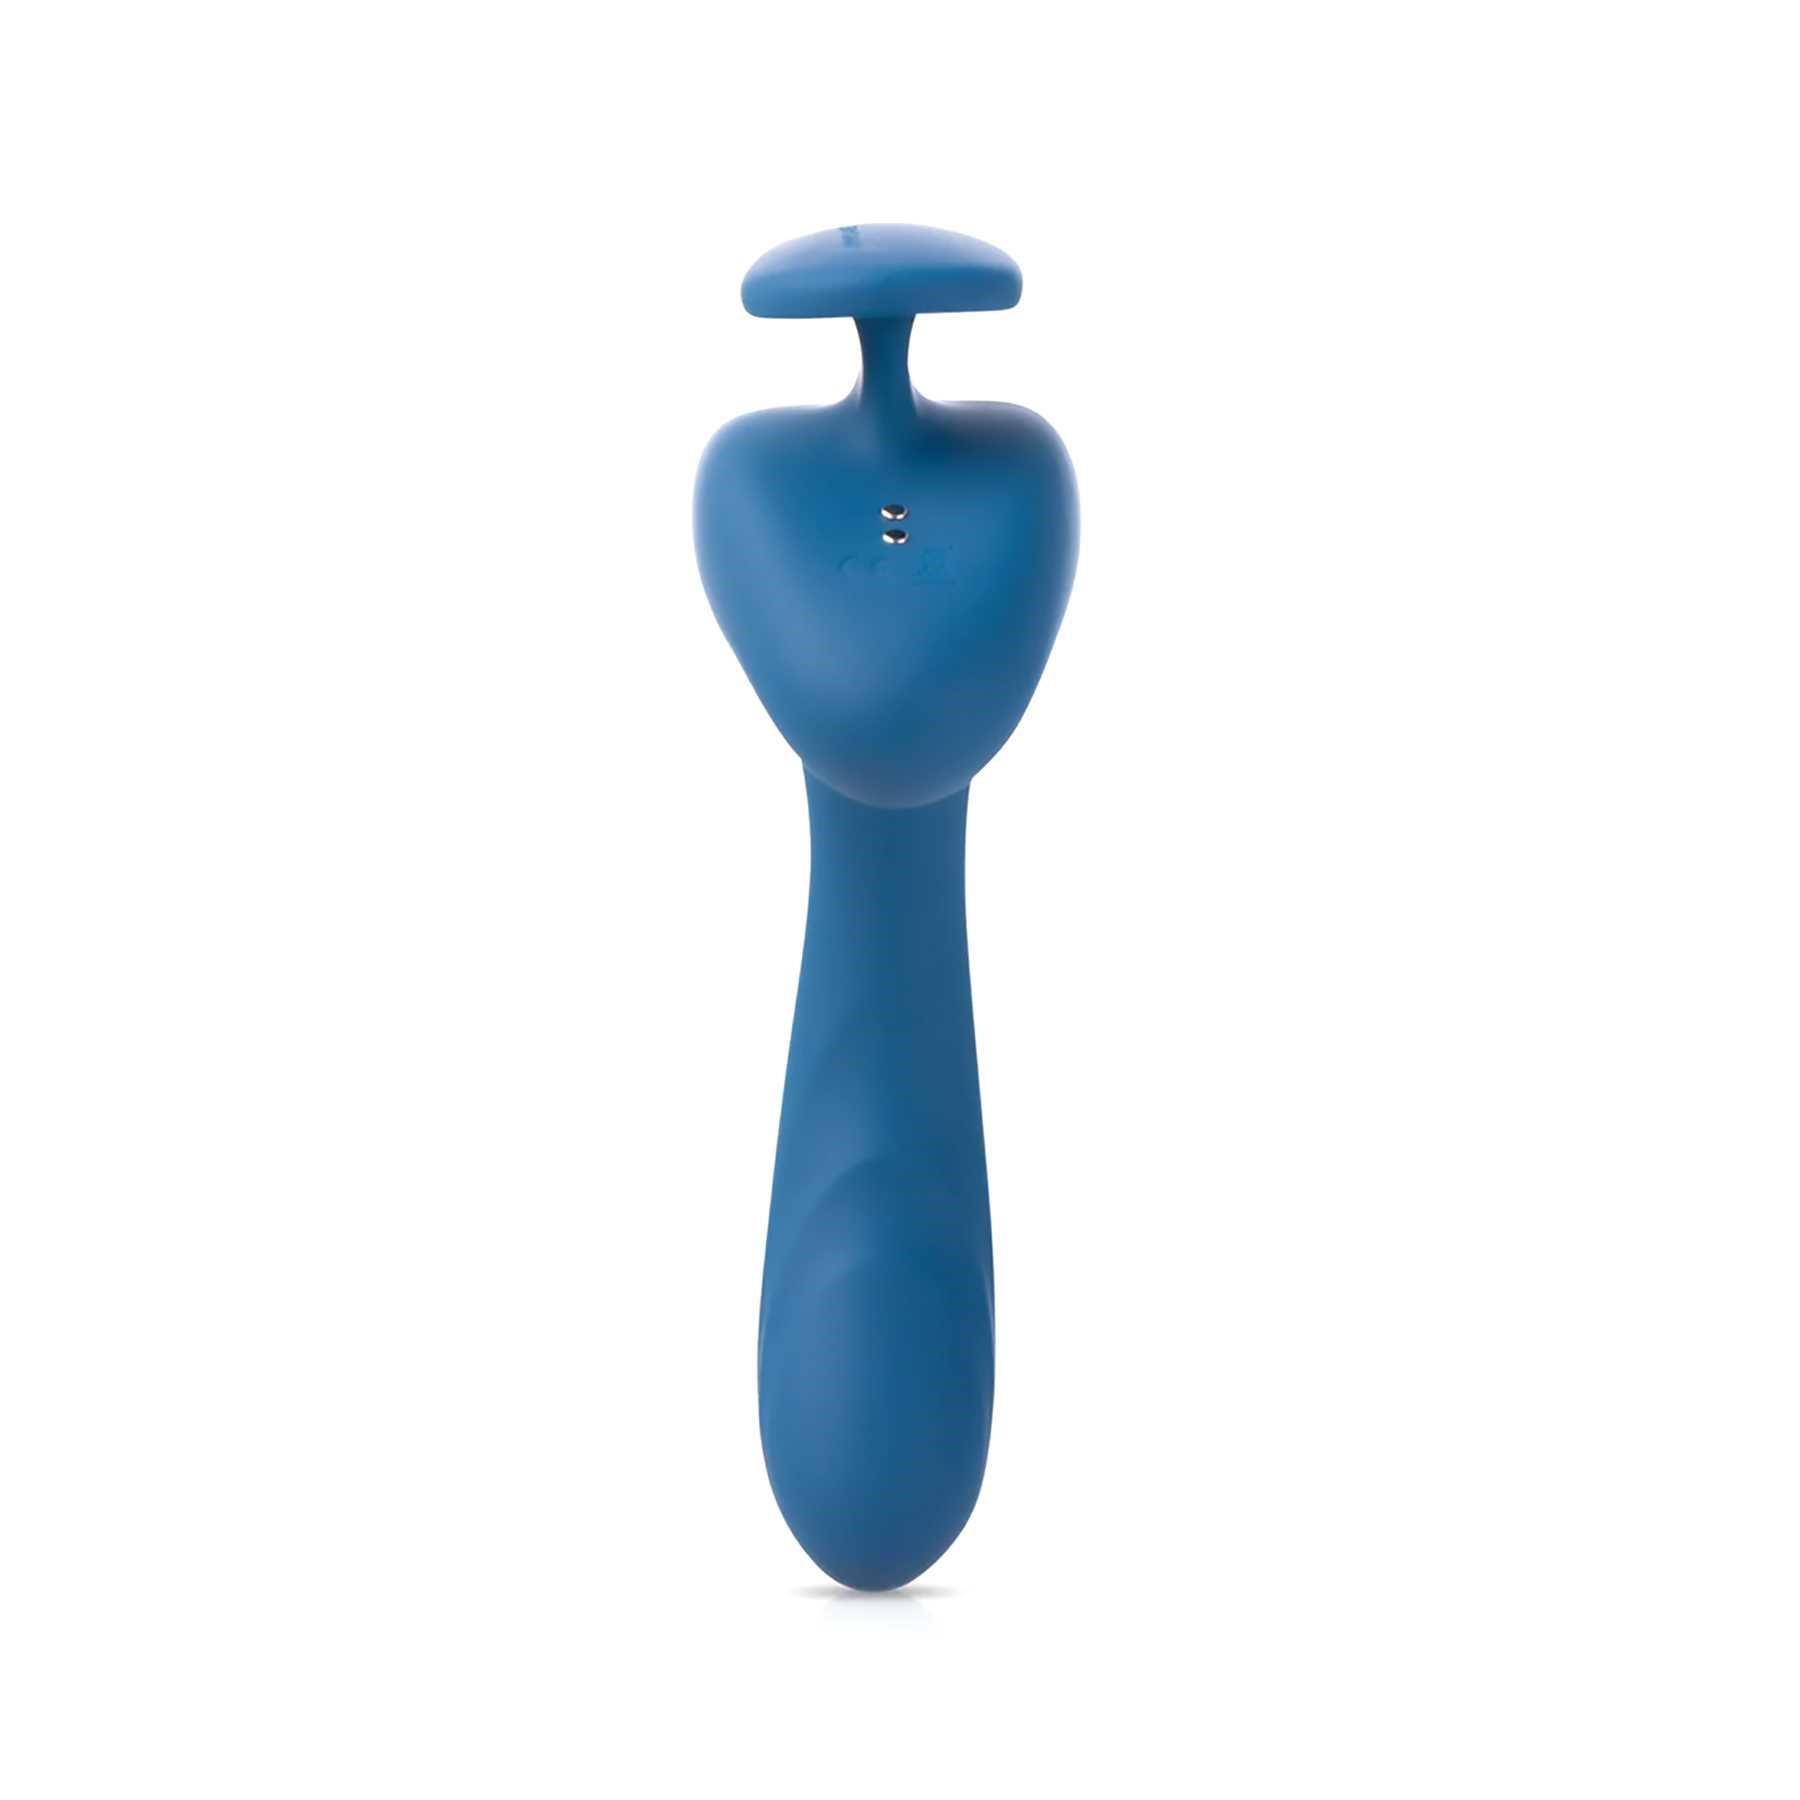 JIMMY JANE SOLIS KYRIOS P-SPOT MASSAGER upright on table